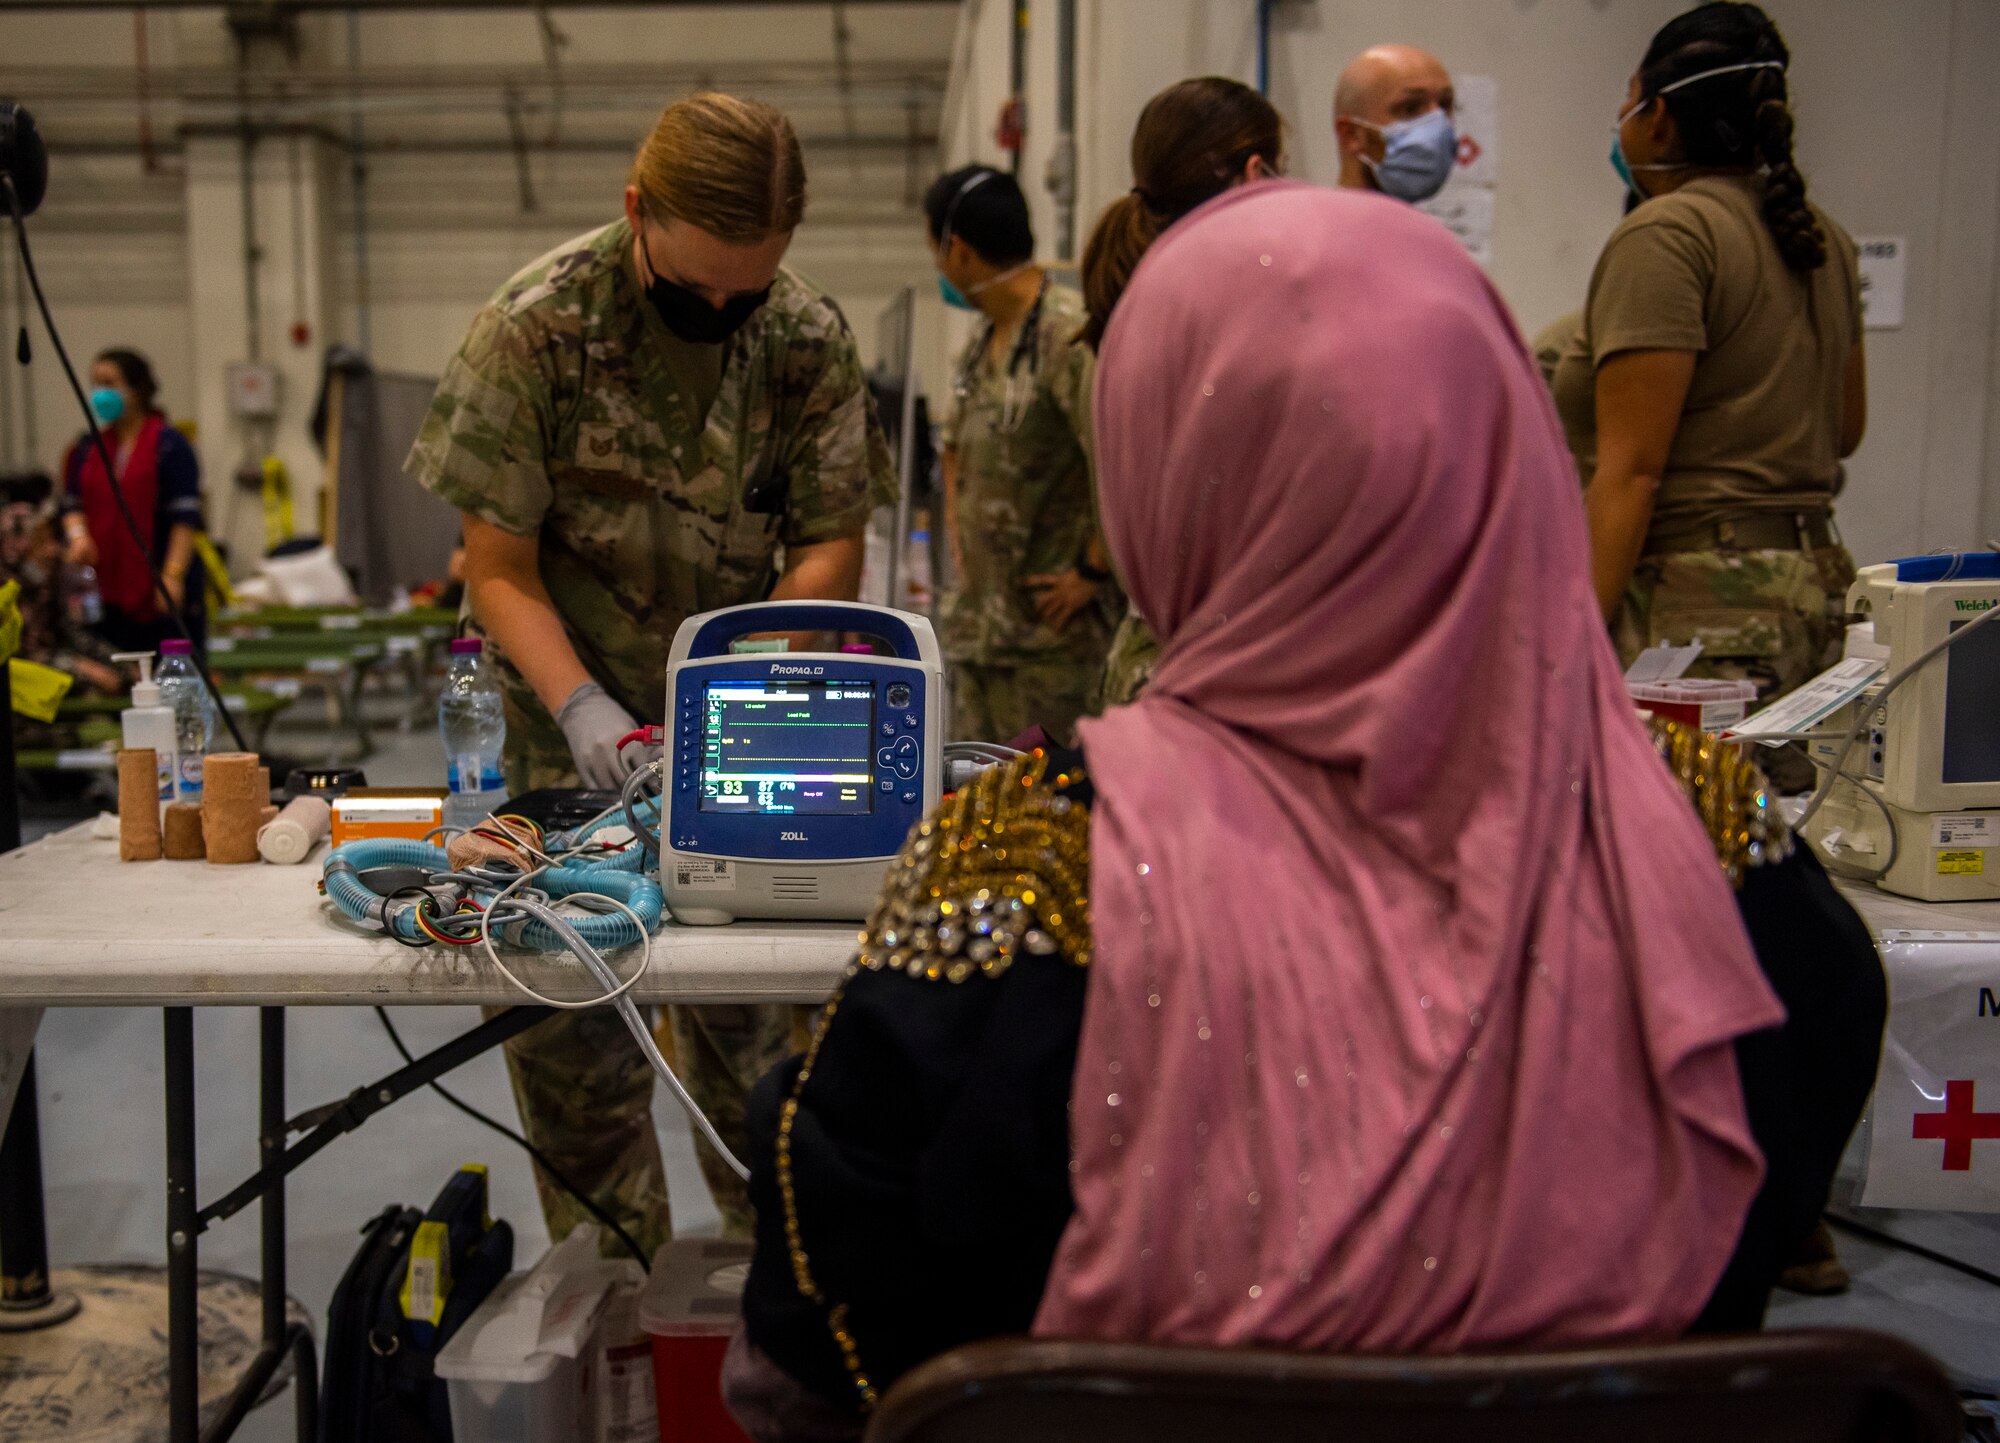 An Airman from the 379th Expeditionary Medical Group provides medical care for Afghanistan evacuees at a hangar, Aug. 19, 2021.